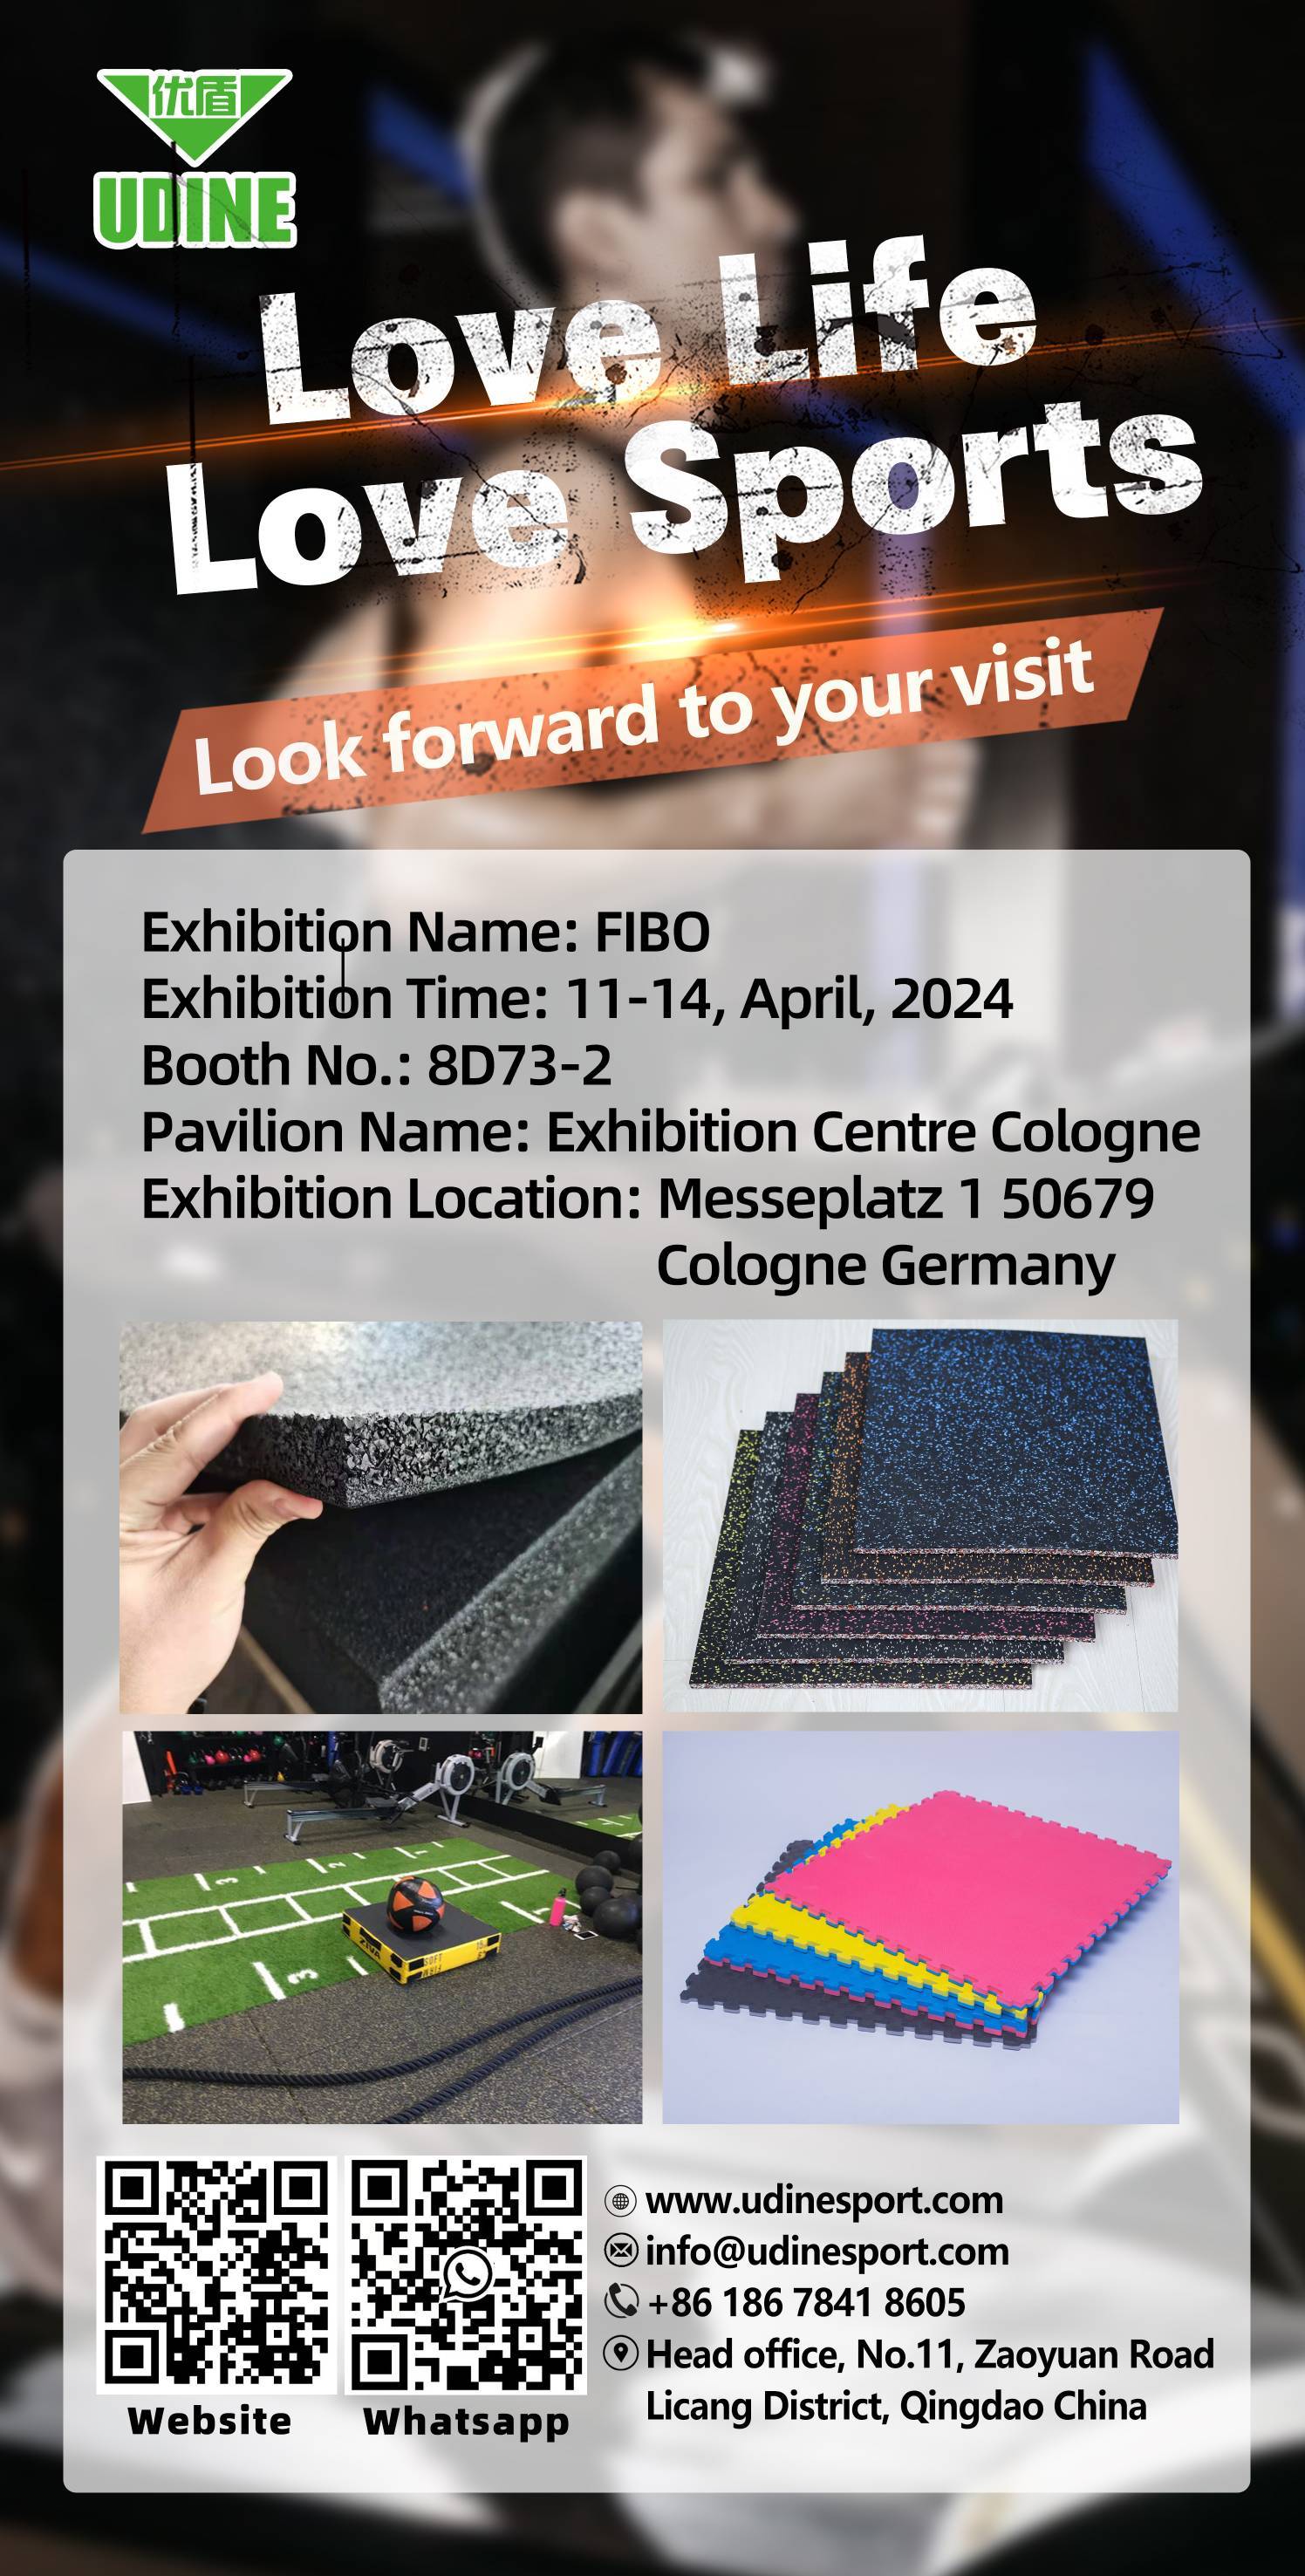 Qingdao Udine Rubber Plastic Company  is attending the 